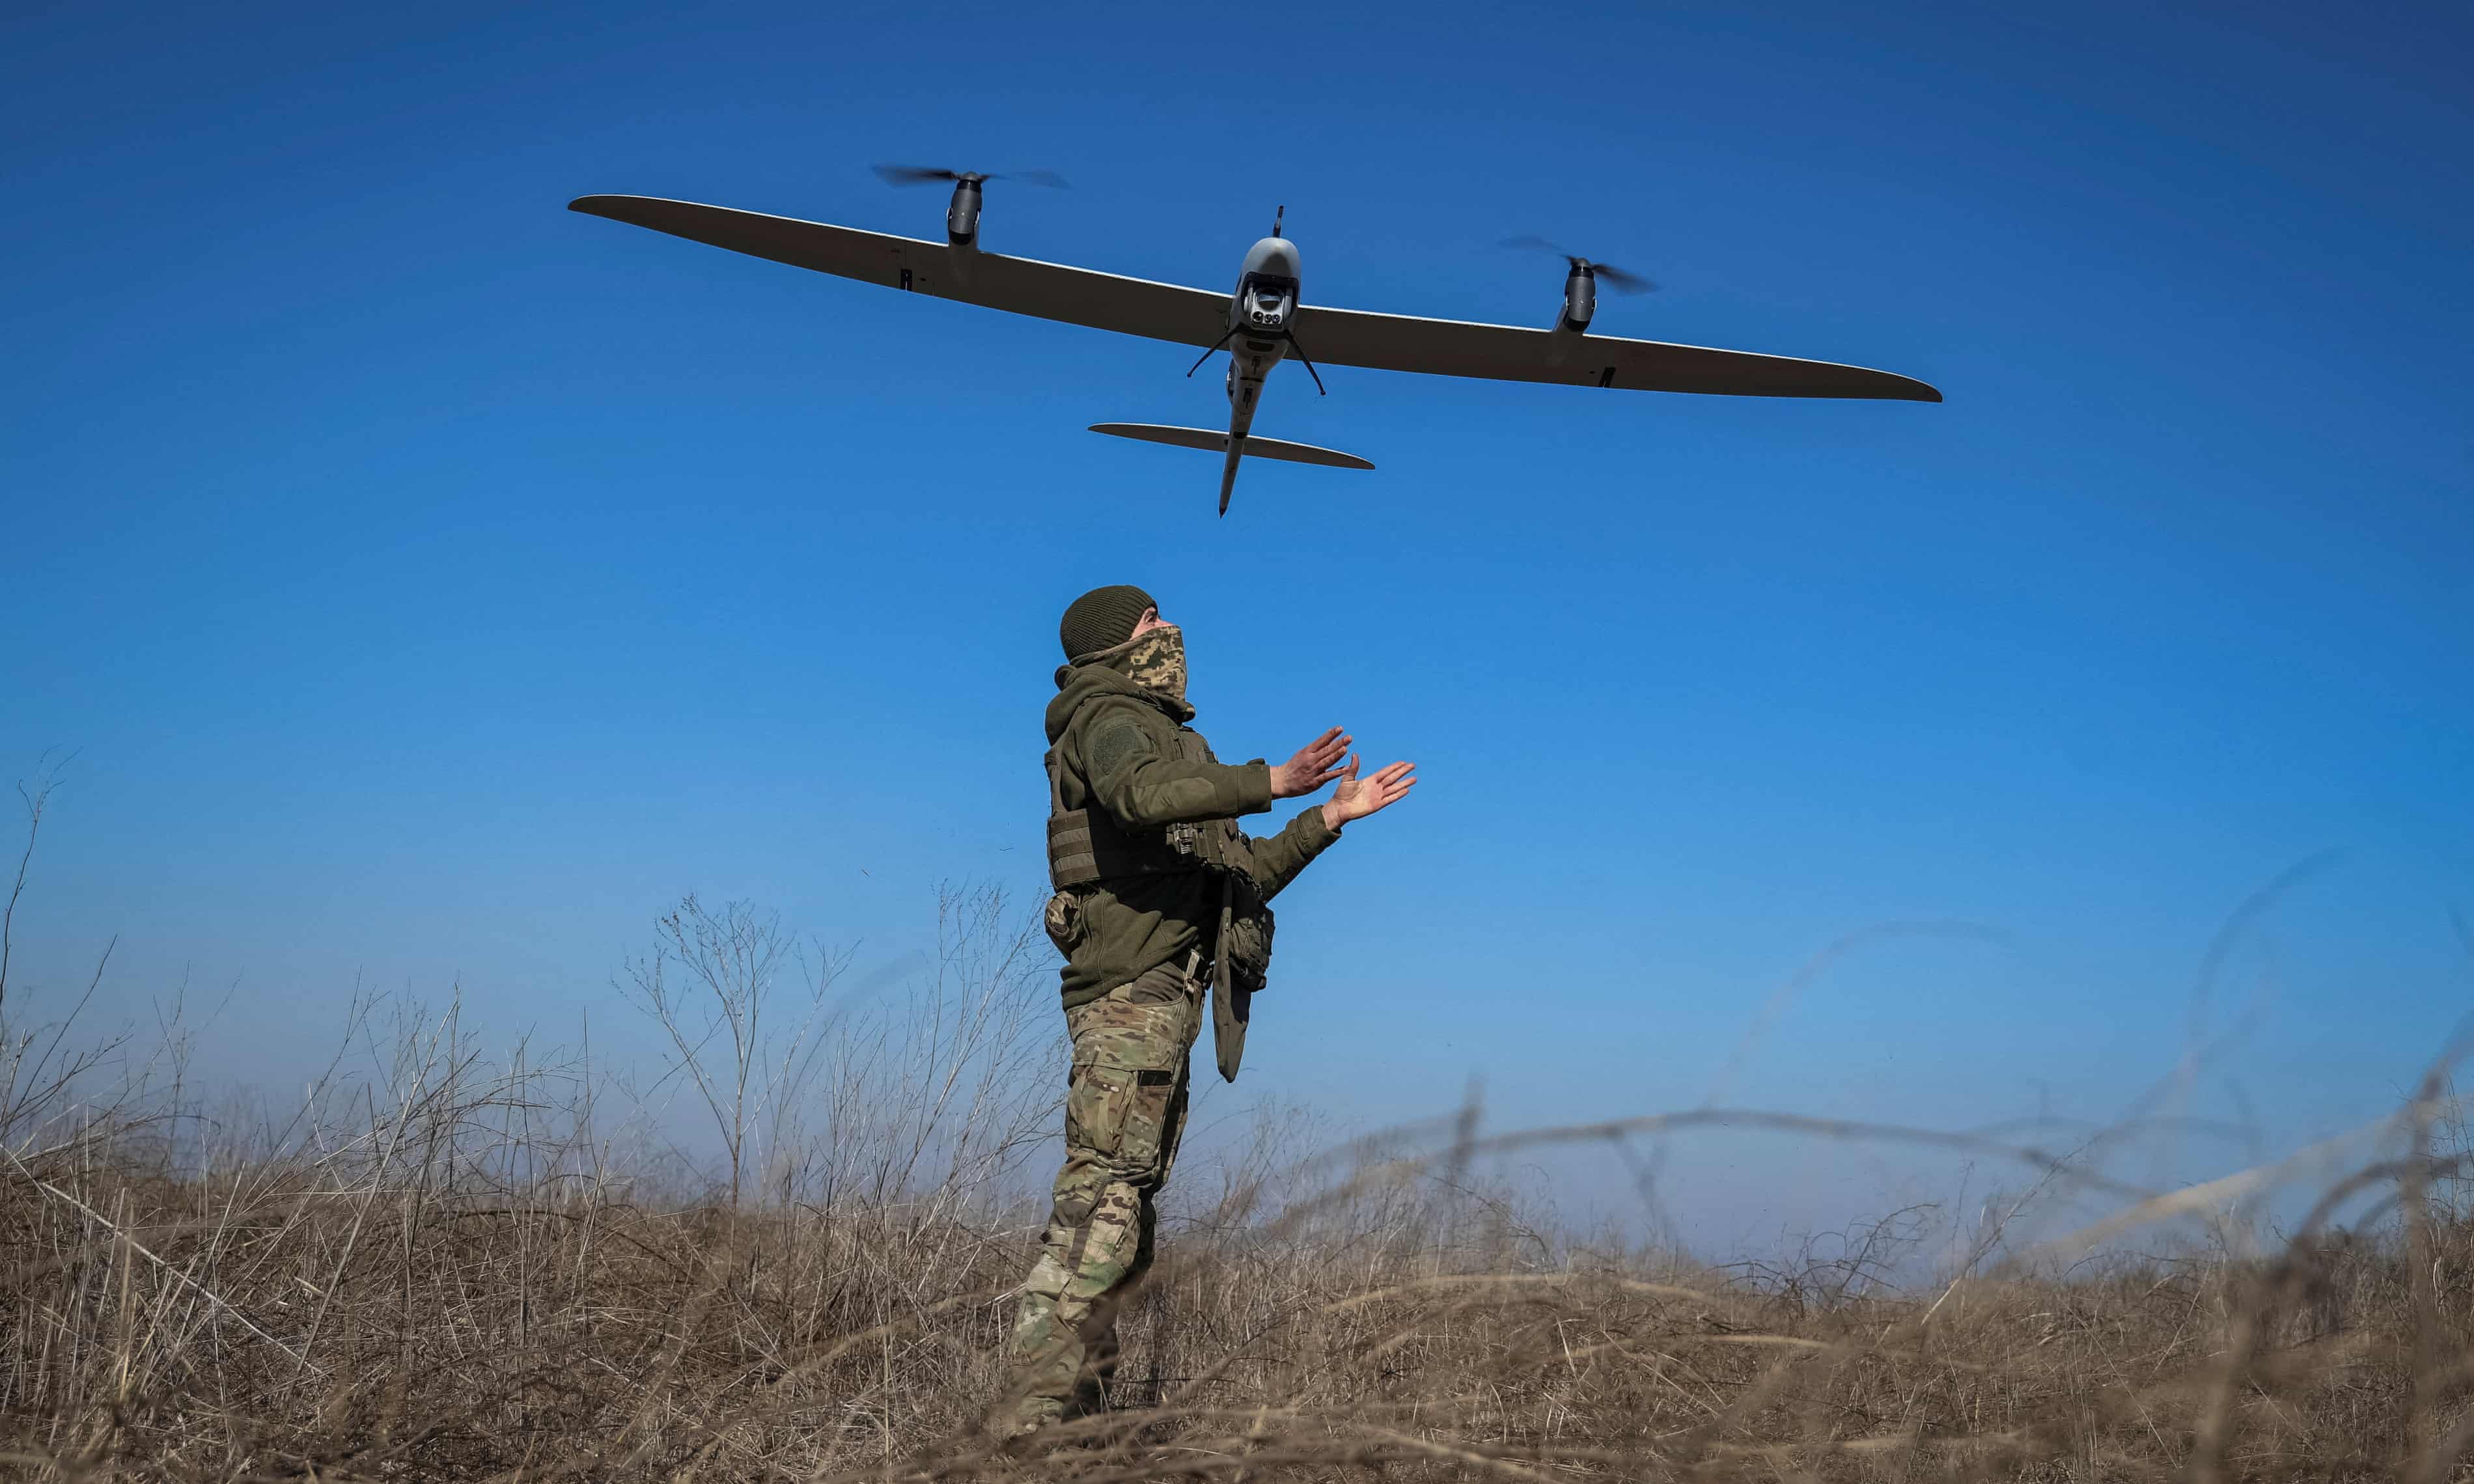 Ukraine says it could make 2m drones a year with financial help from west (theguardian.com)